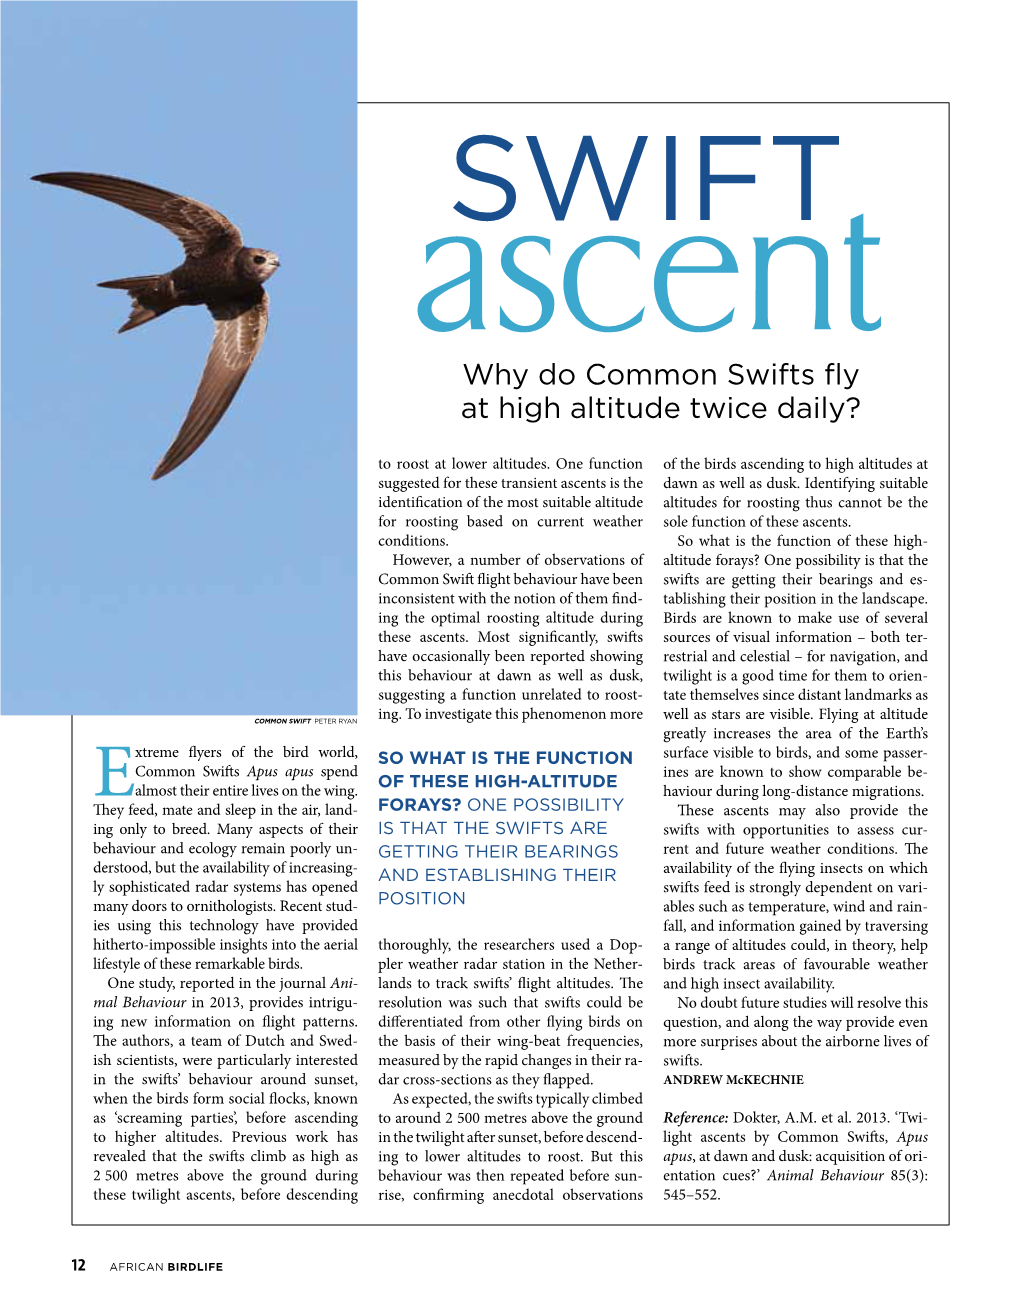 Why Do Common Swifts Fly at High Altitude Twice Daily?